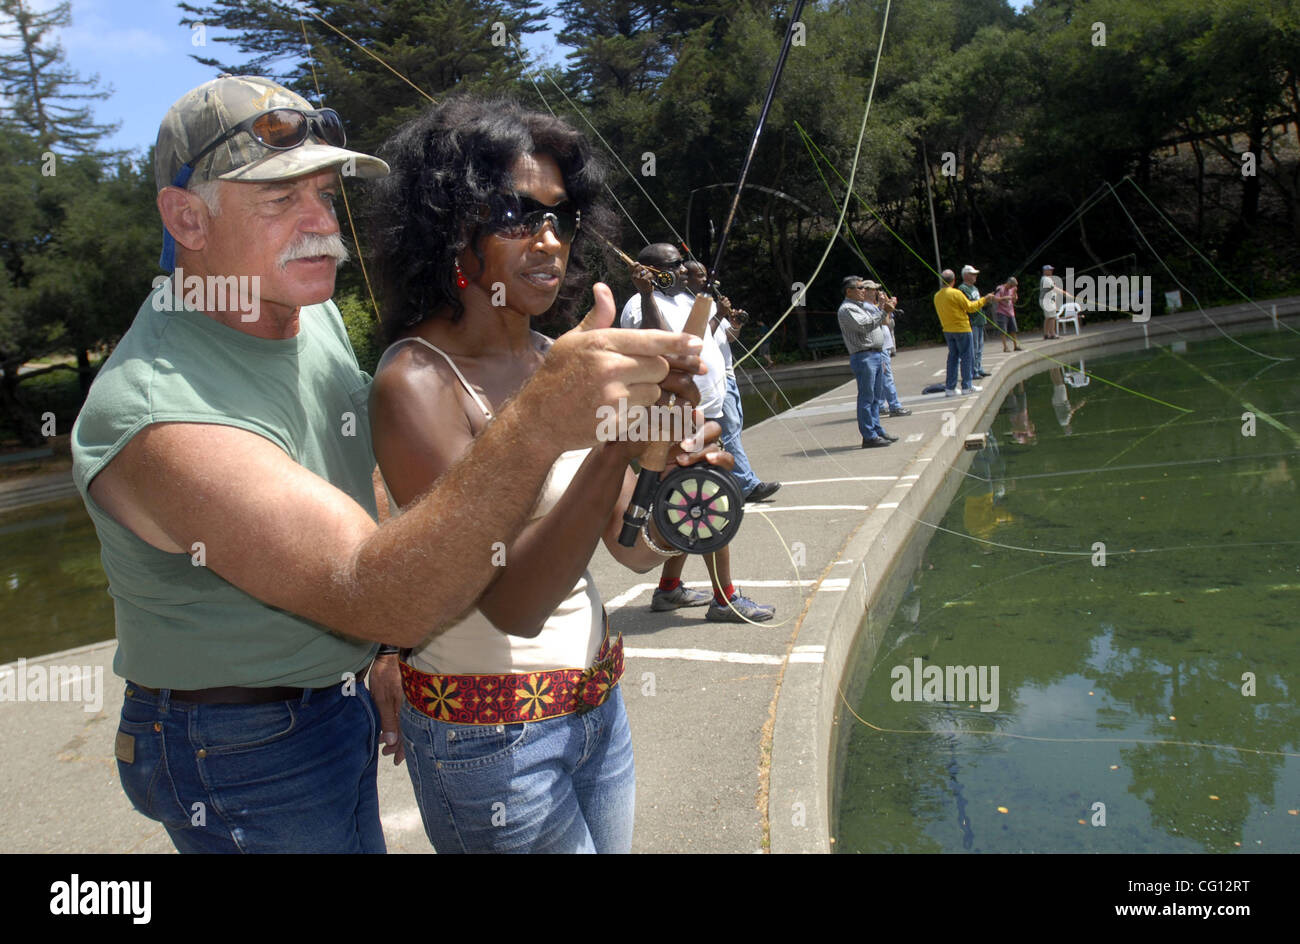 The Oakland Casting Club's Lessons Coordinator John Wurzel of Antioch,  Calif., (left) helps Denise Mapes of Oakland, Calif., (right) with her fly  casting during the clubs free casting lessons held at McCrea